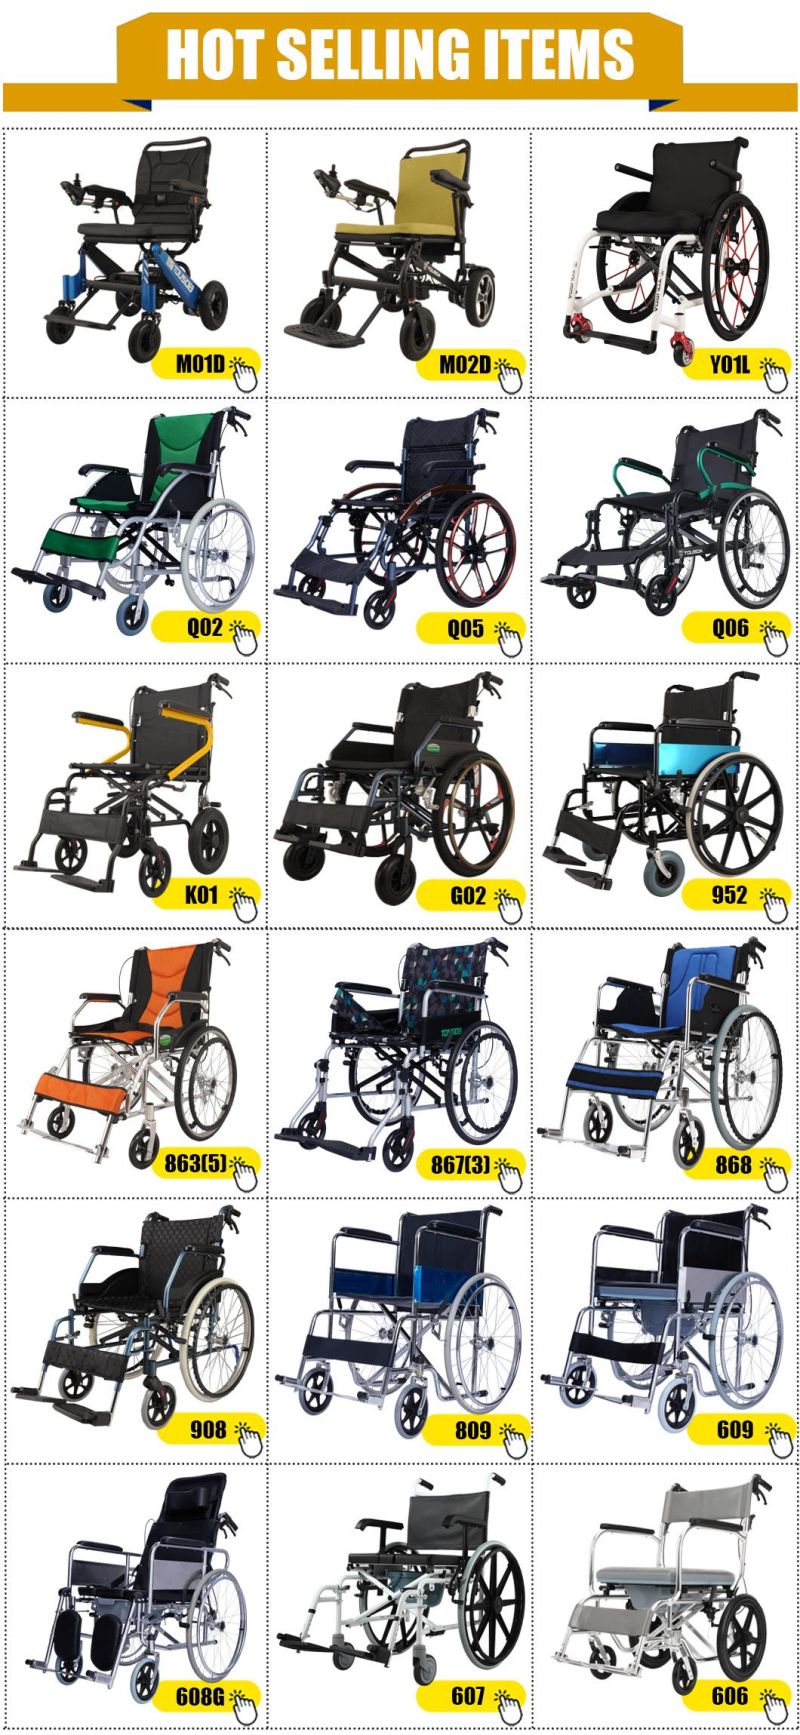 Contact Supplier Chat Now! OEM Transport Folding Wheelchair Laydown Chair with Wheels Travel Portable Manual Steel Wheel Chair